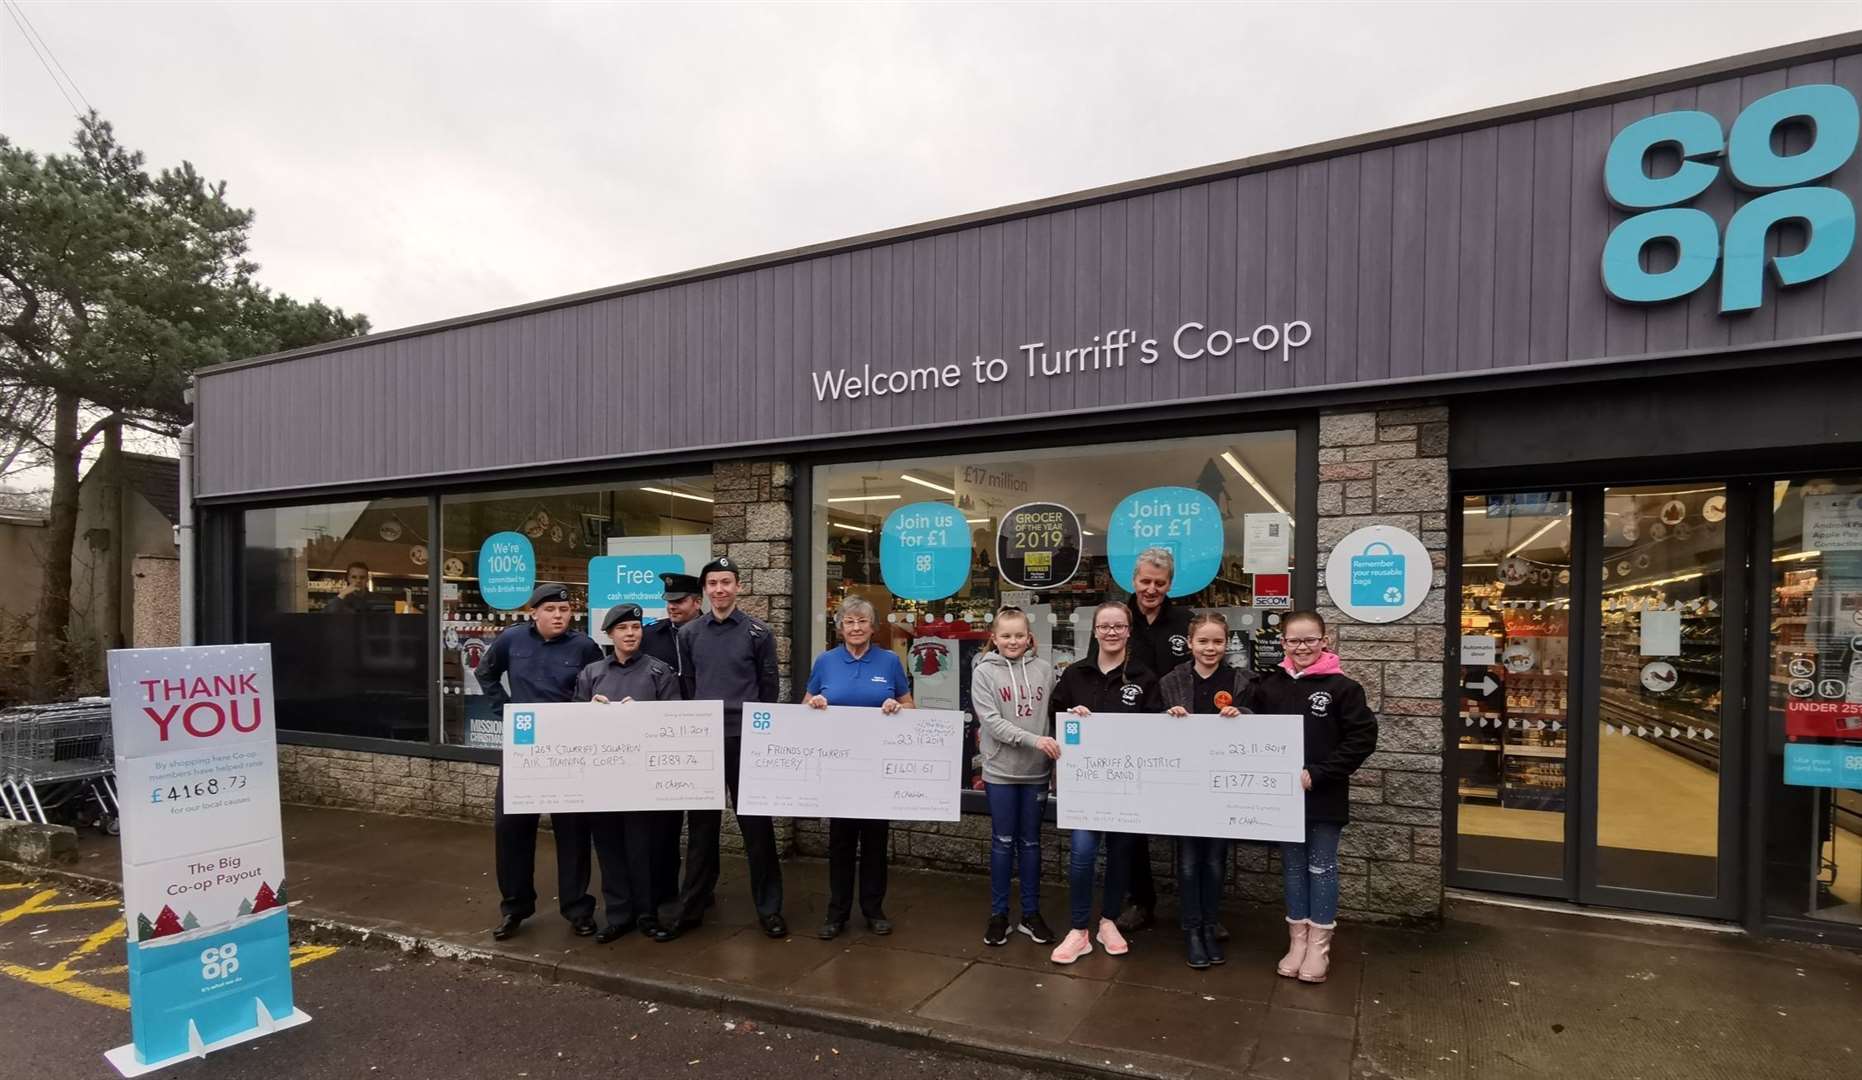 Recipients of the Turriff Co-op Community Fund were so delighted to get support from the community.